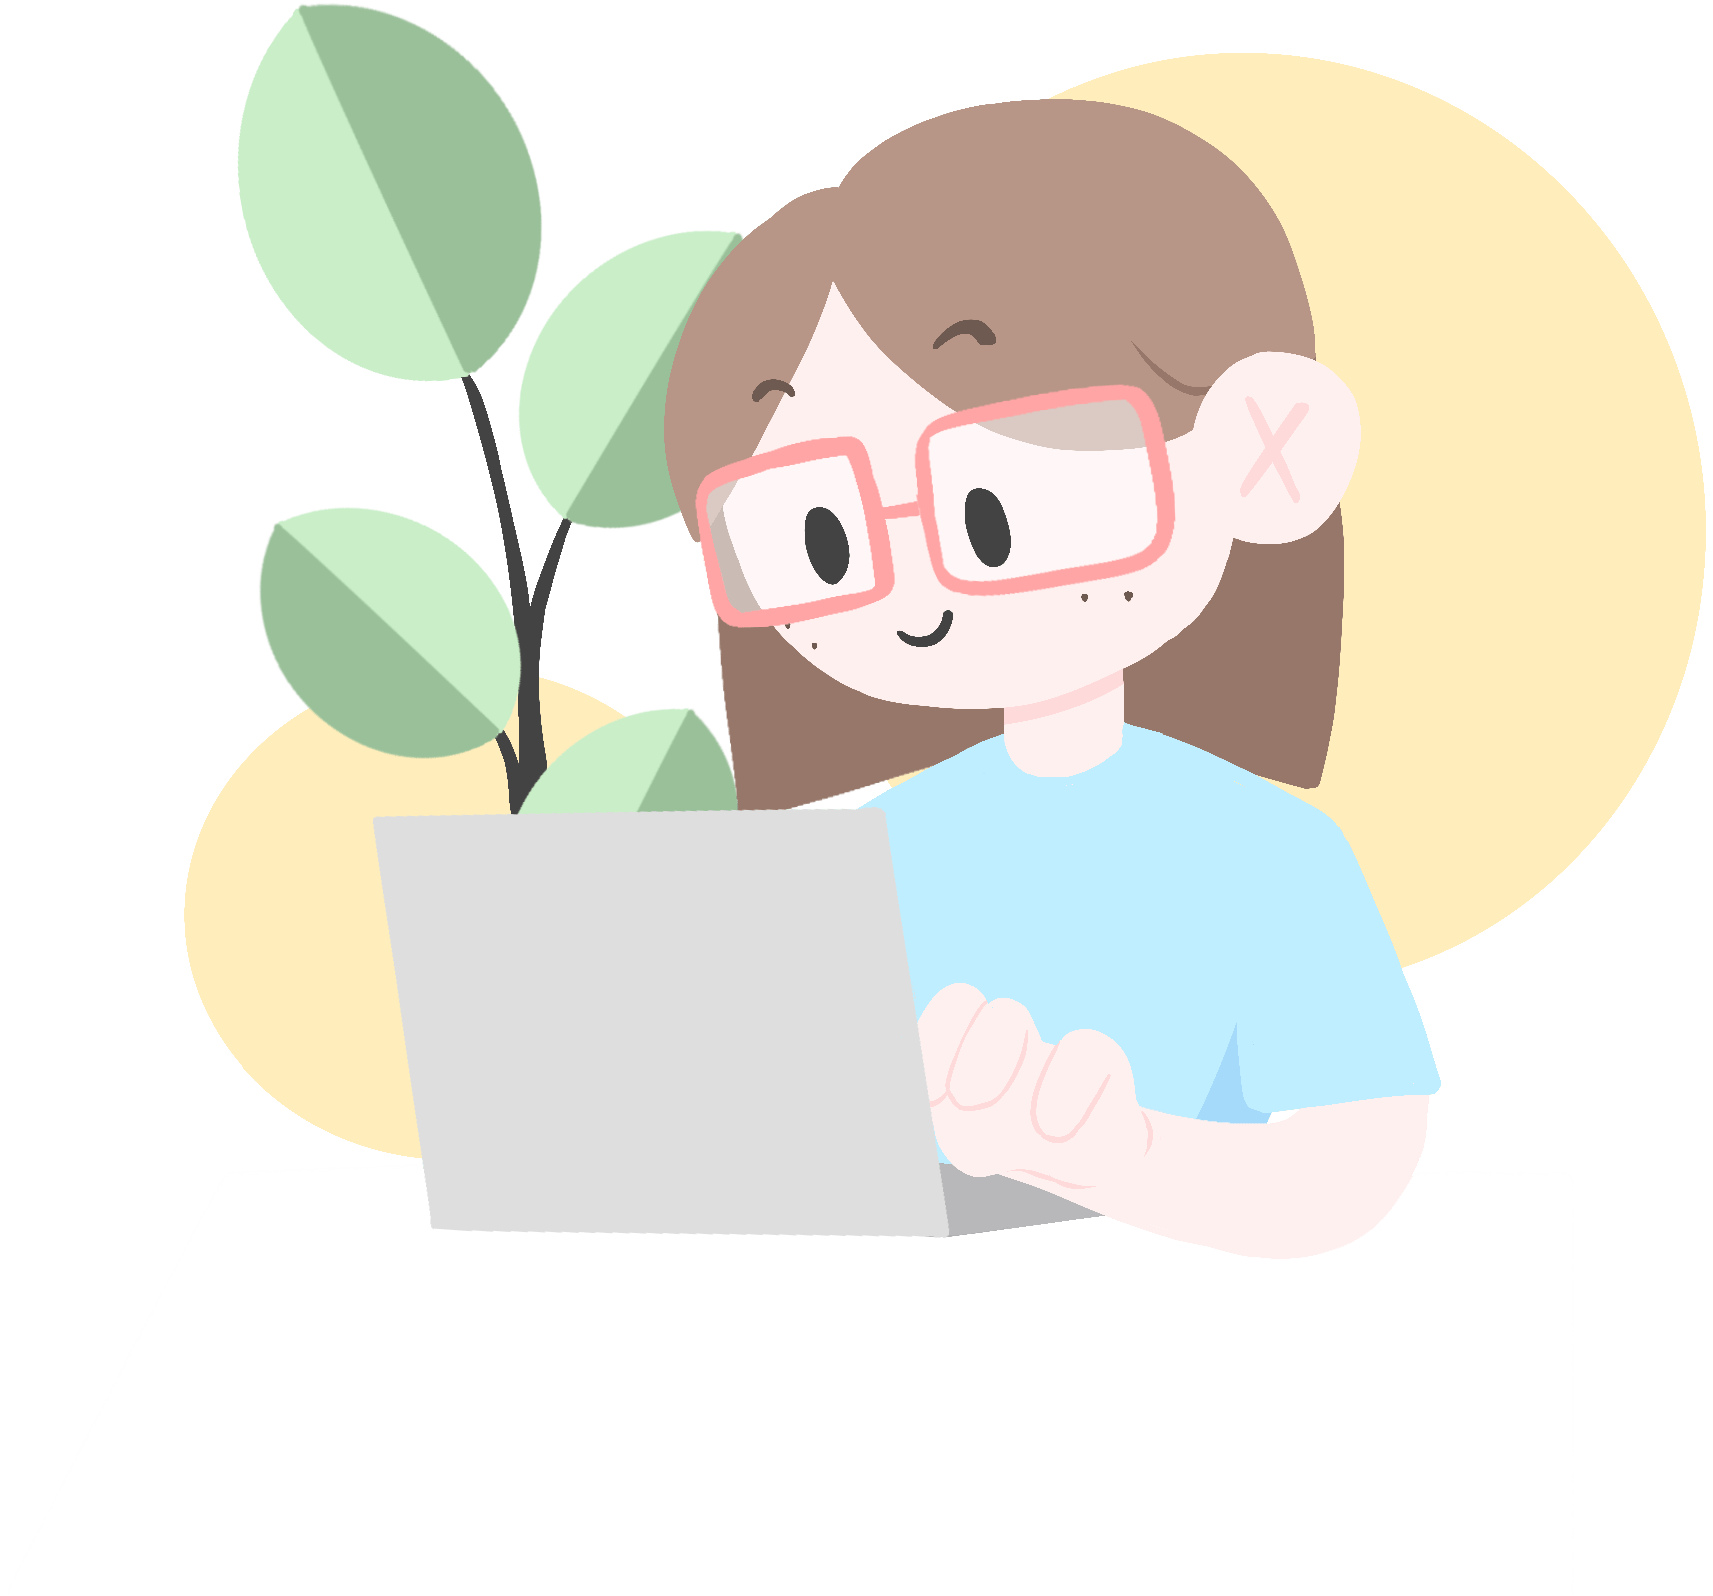 A stylized drawing of me, Rachael Metcalf, at a computer